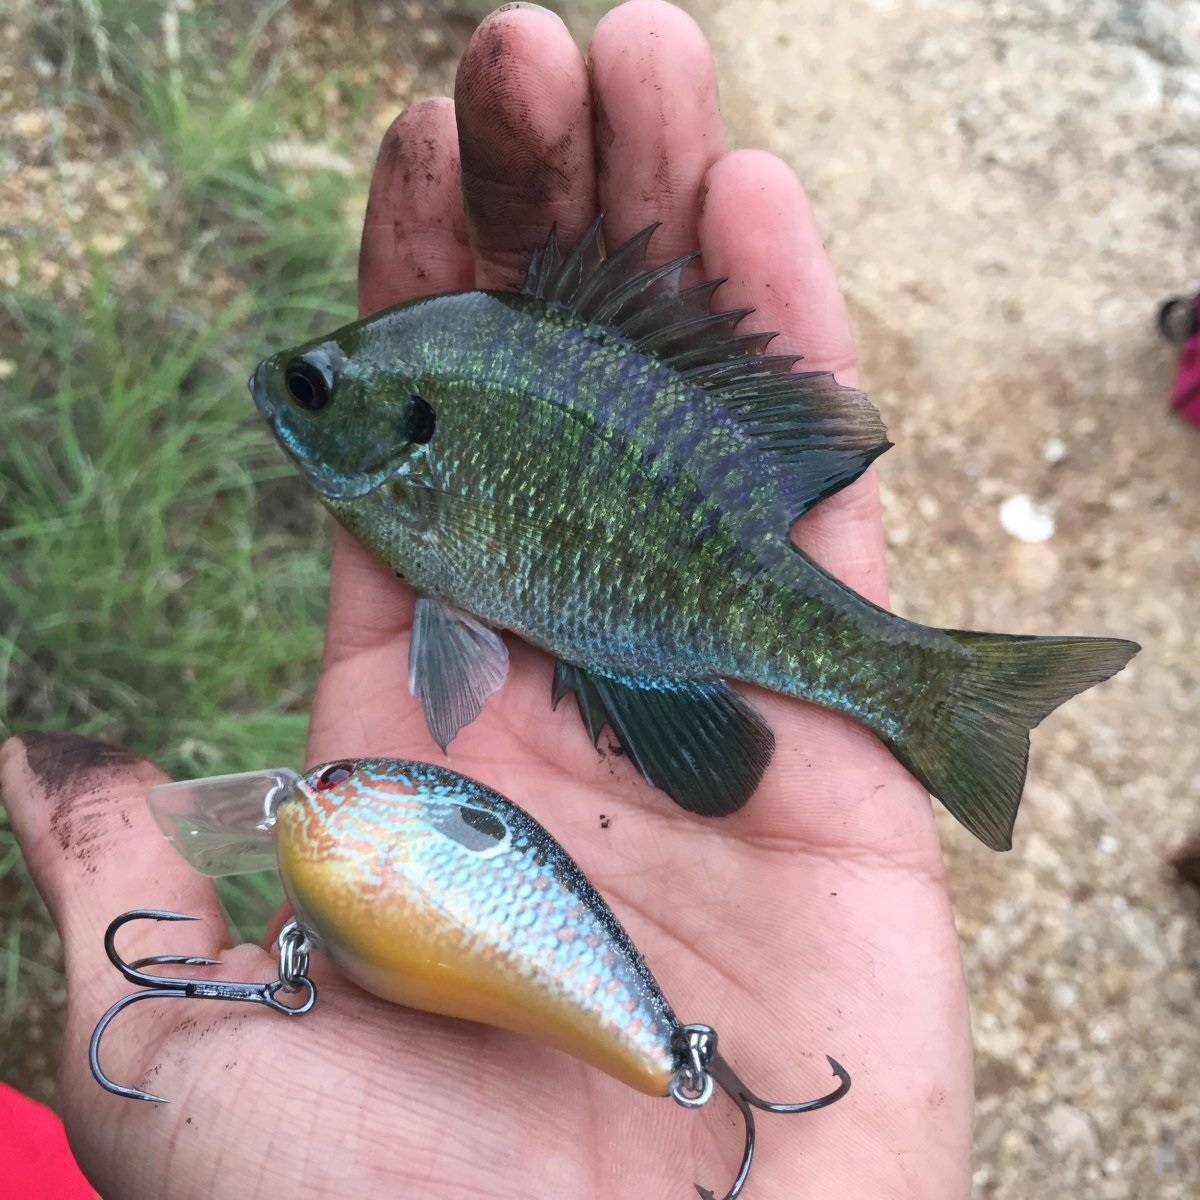 Pumpkinseed sunfish resting in a hand next to a pumpkinseed crankbait.